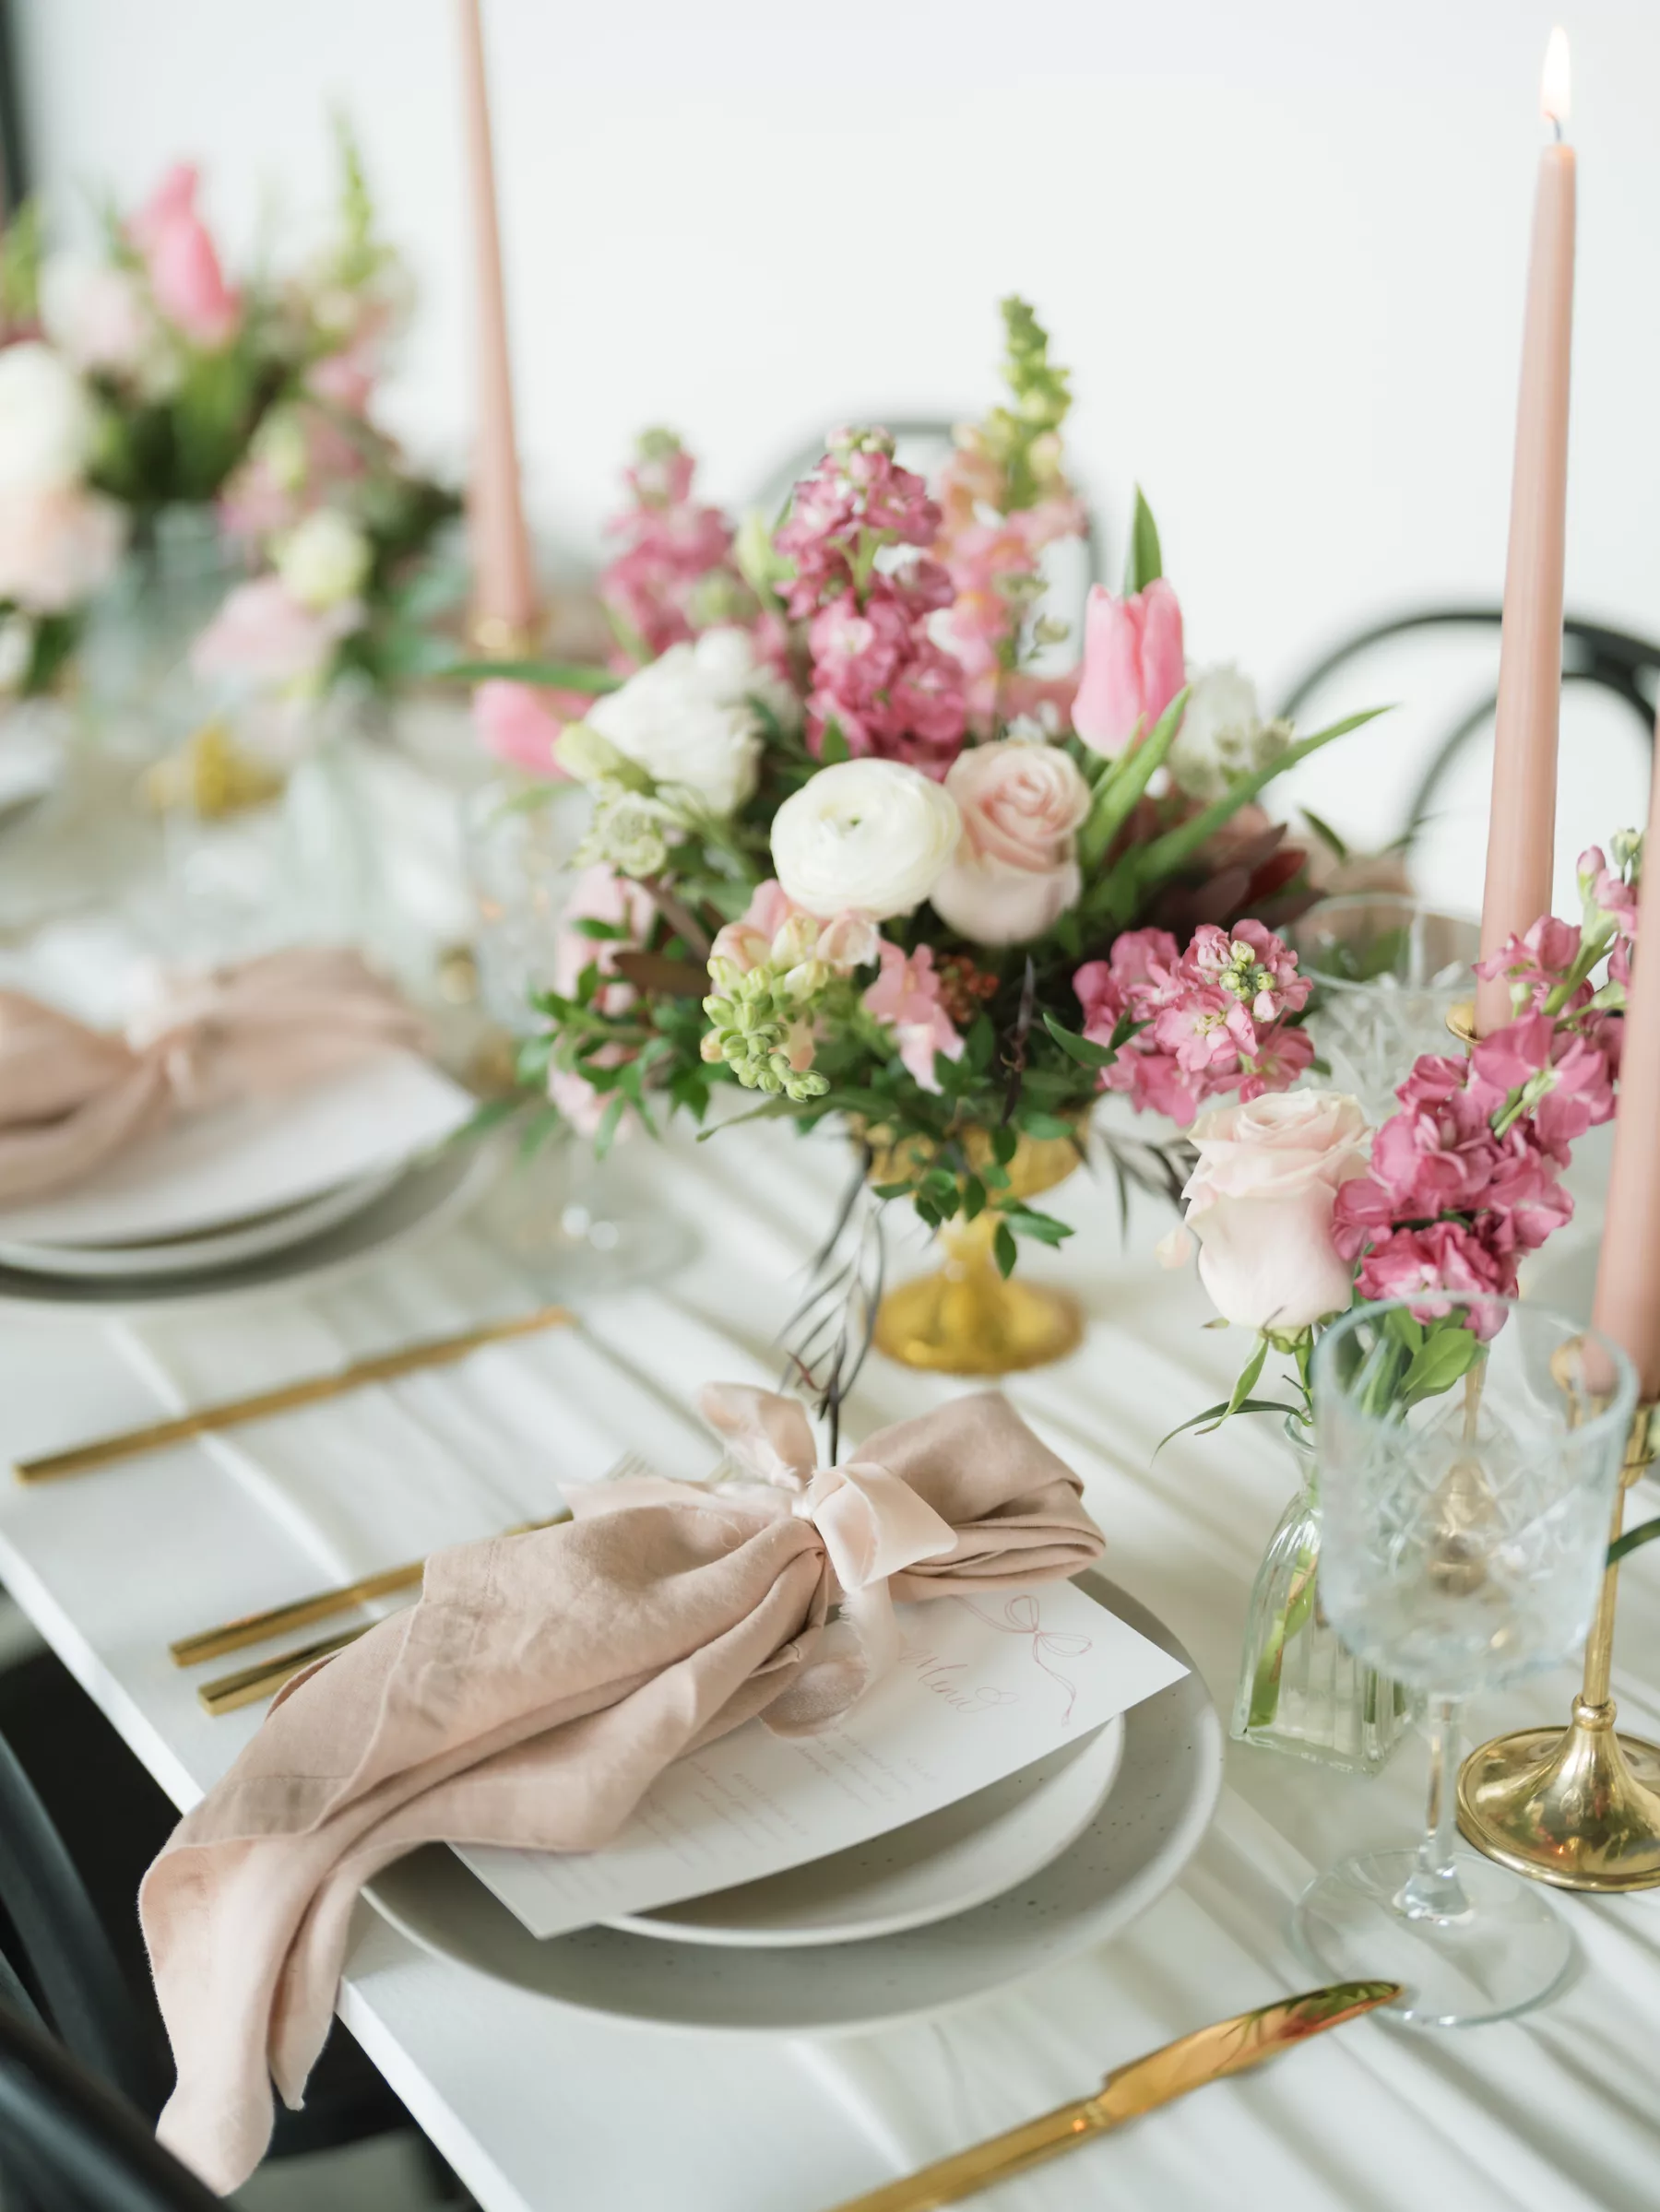 Romantic Pink Wedding Reception Tablescape Place Setting Inspiration | White Anemone, Pink Roses, Tulips, and Stock Flower Centerpiece Decor Ideas | Tampa Bay Florist Save The Date Florida